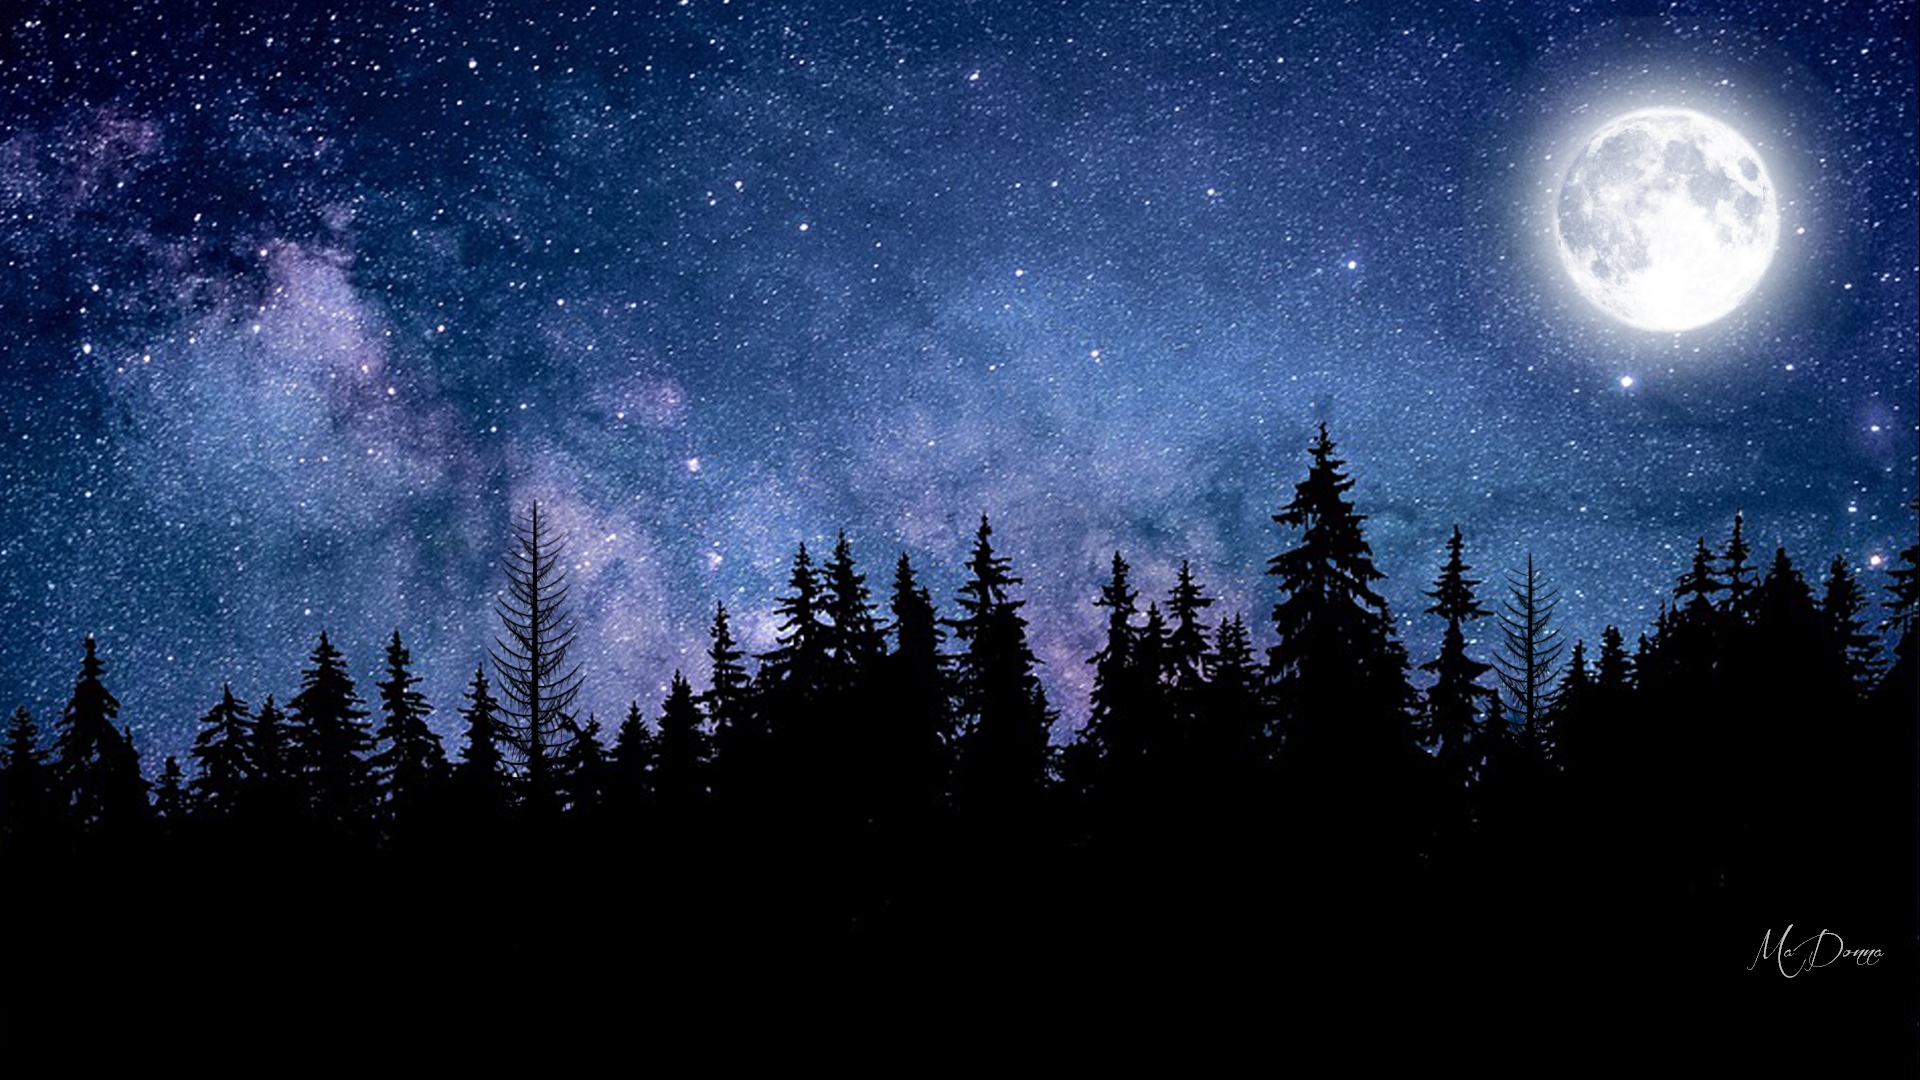 Full Moon and Milky Way over Forest by MaDonna